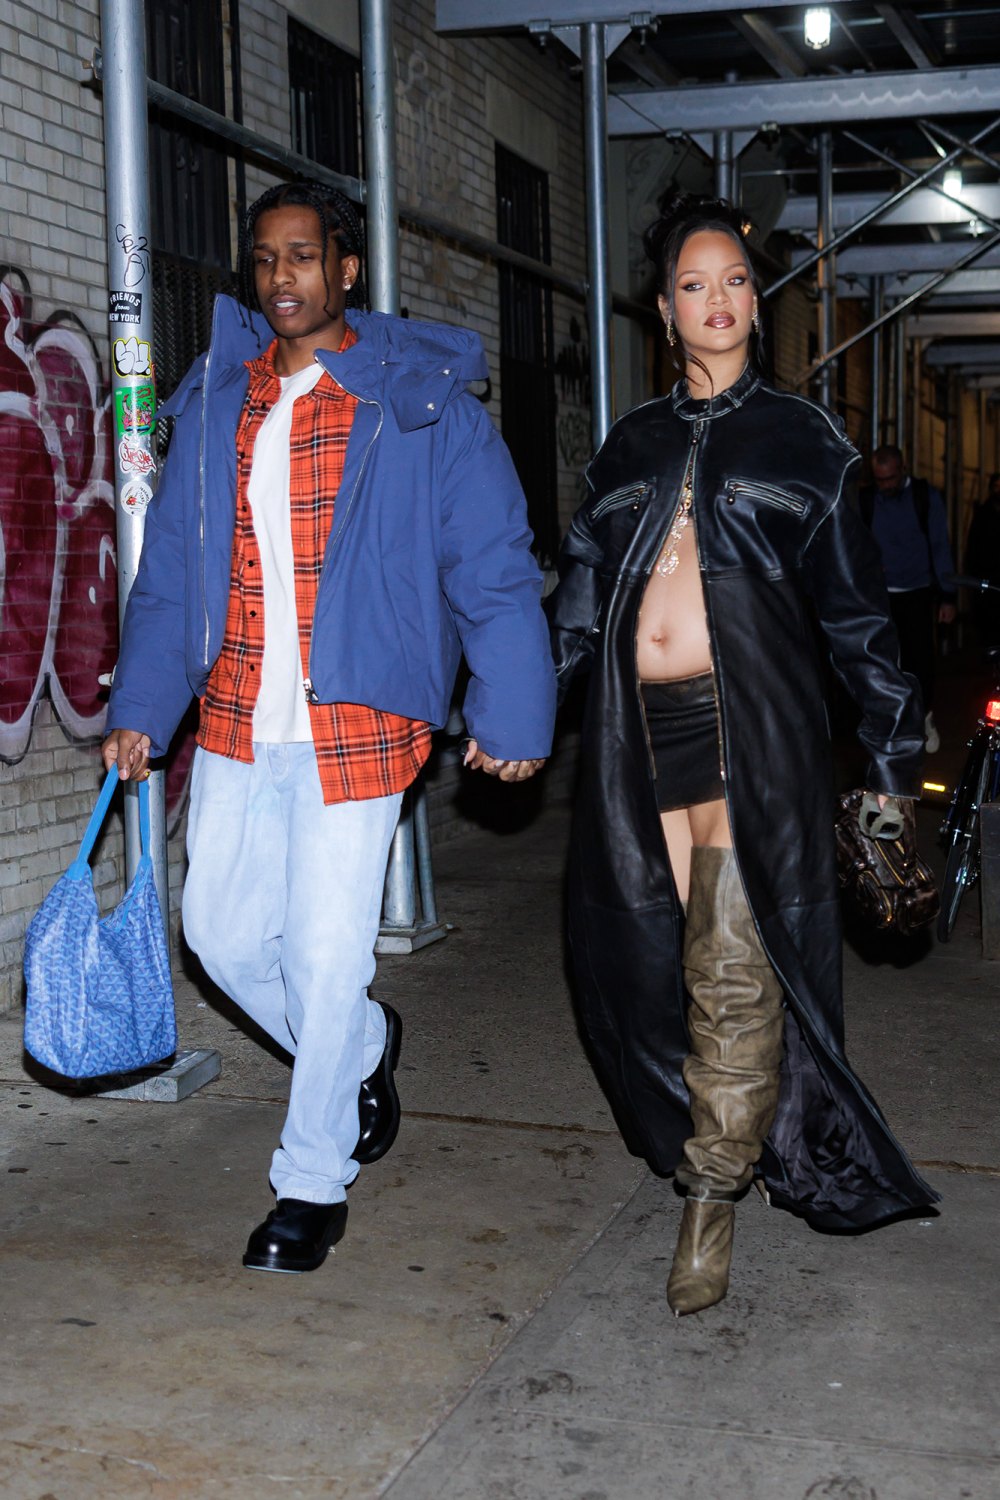 Rihanna Showed Her Team Spirit In a New York Yankees Jacket and